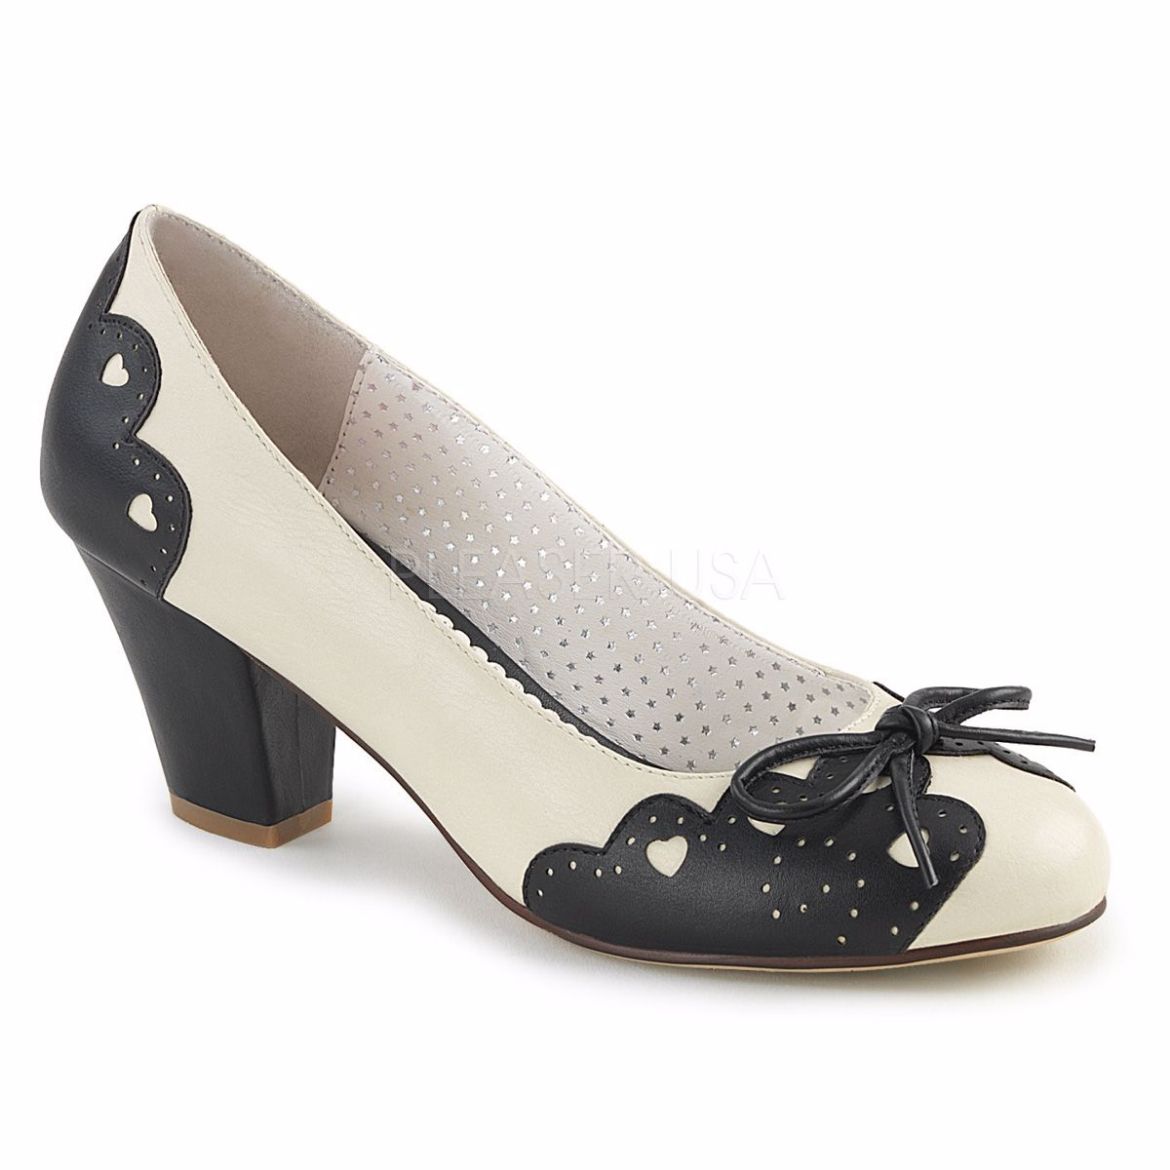 Product image of Pin Up Couture Wiggle-17 Black-Cream Faux Leather, 2 1/2 inch (6.4 cm) Cuben Heel Court Pump Shoes